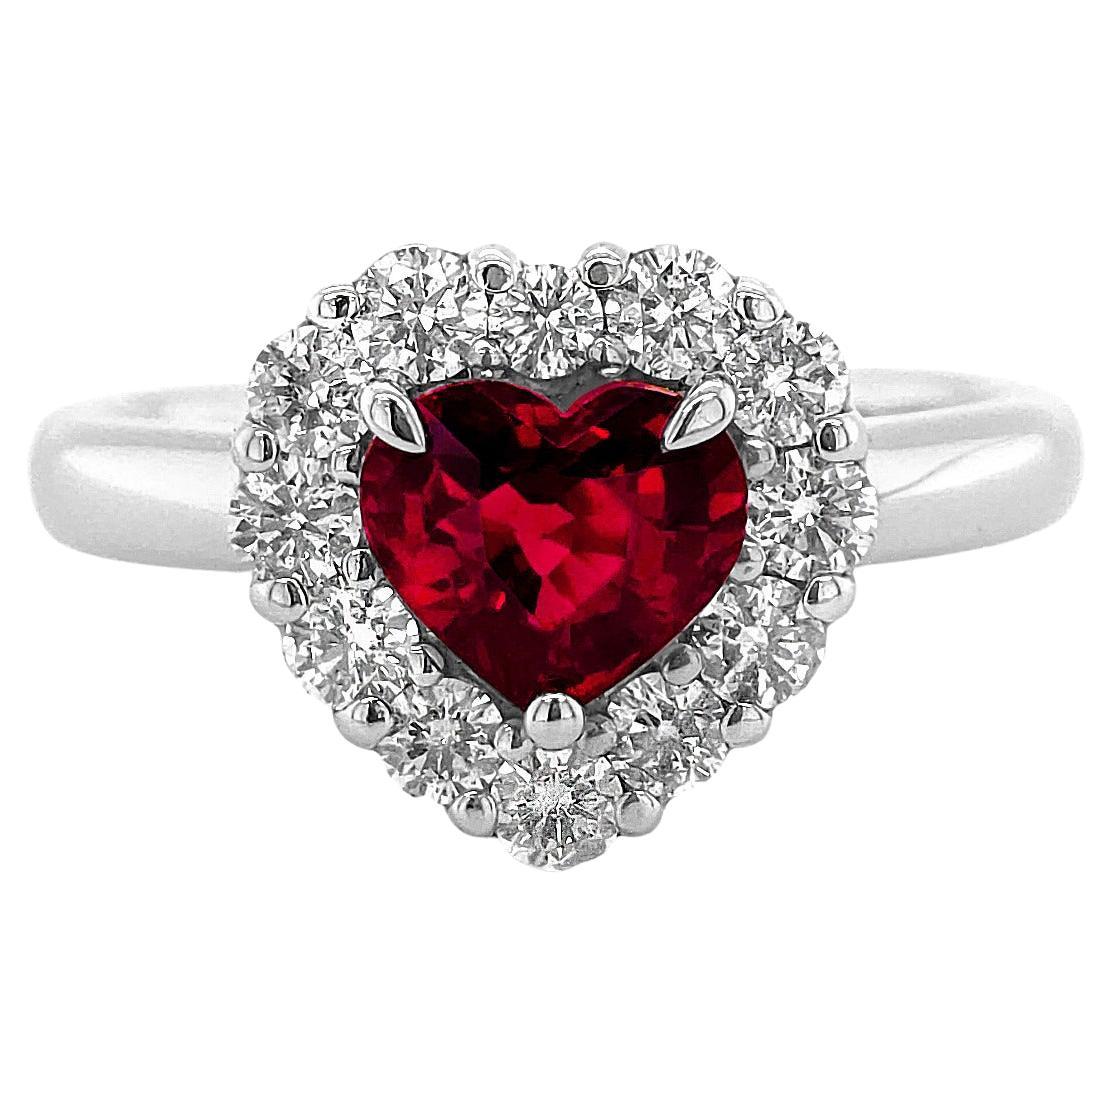 AIGS Certified 1.25 Carats "Pigeon Blood" Ruby Diamonds set in Platinum Ring